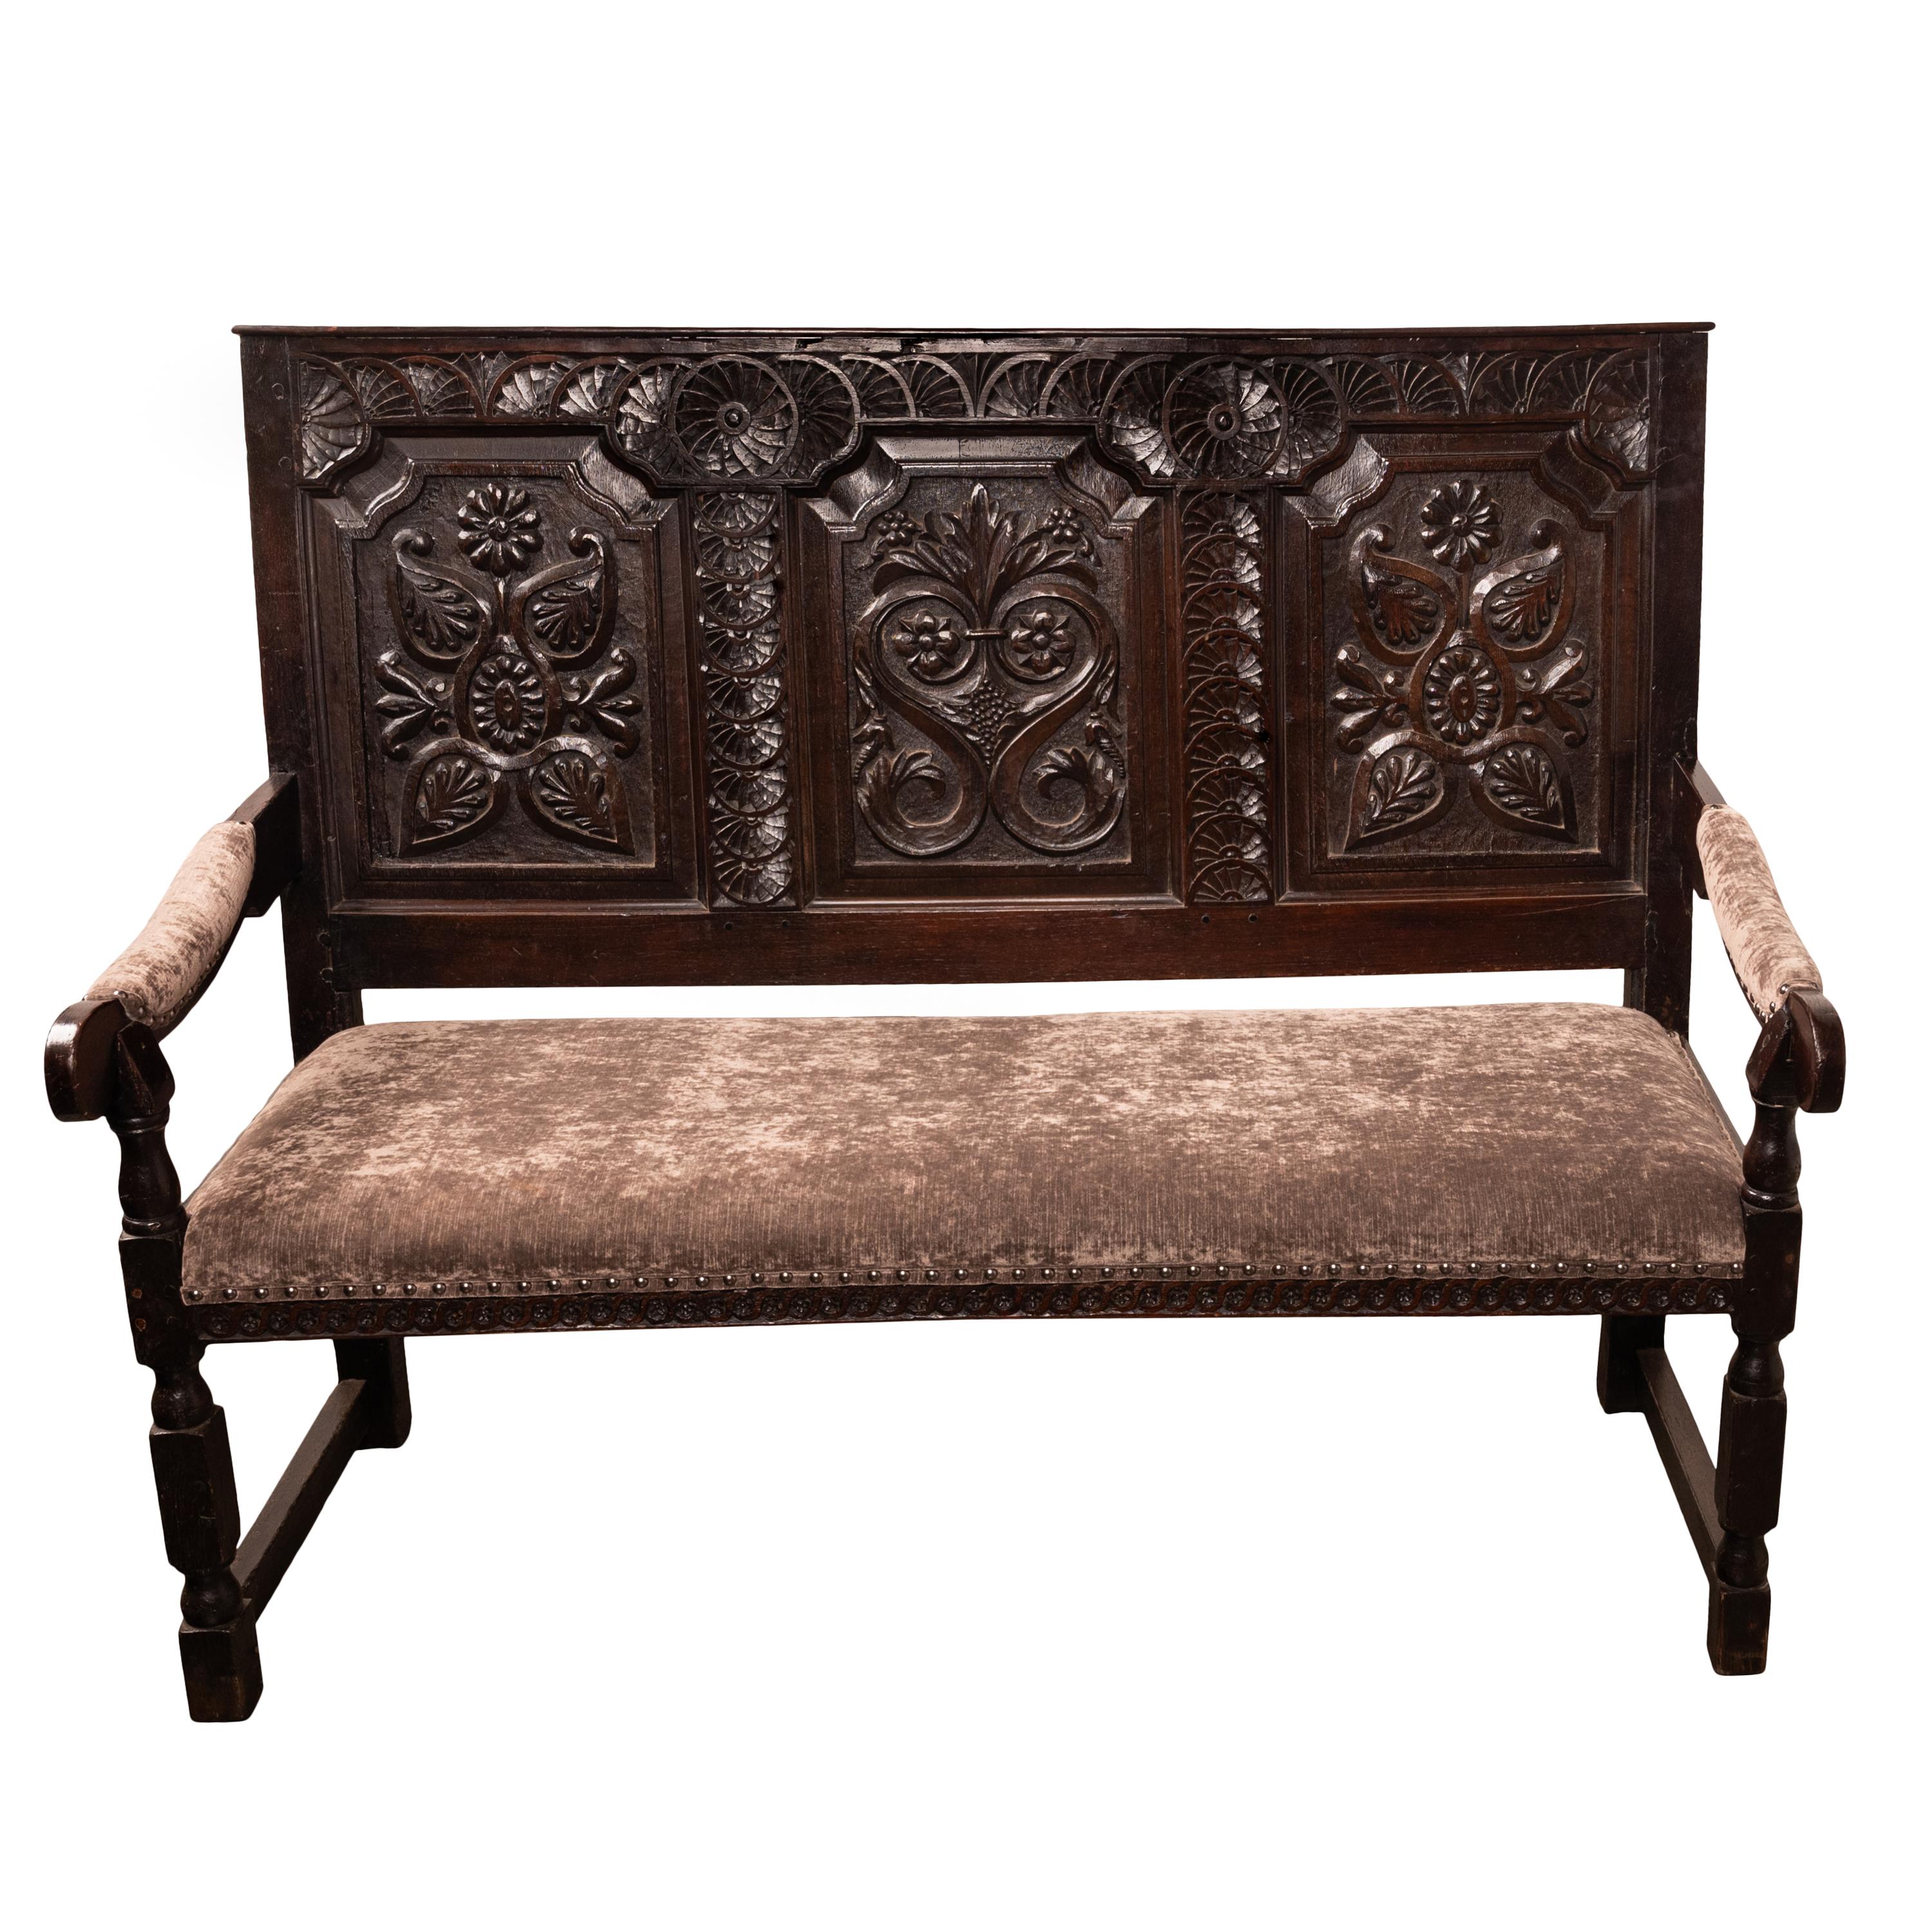 A very fine antique King Charles II, English Restoraion Period carved oak settle, England, Circa 1680.
This settle is from the period of the Restoration of the English monarchy under the House of Stuart monarchy, after the English Civil War. The